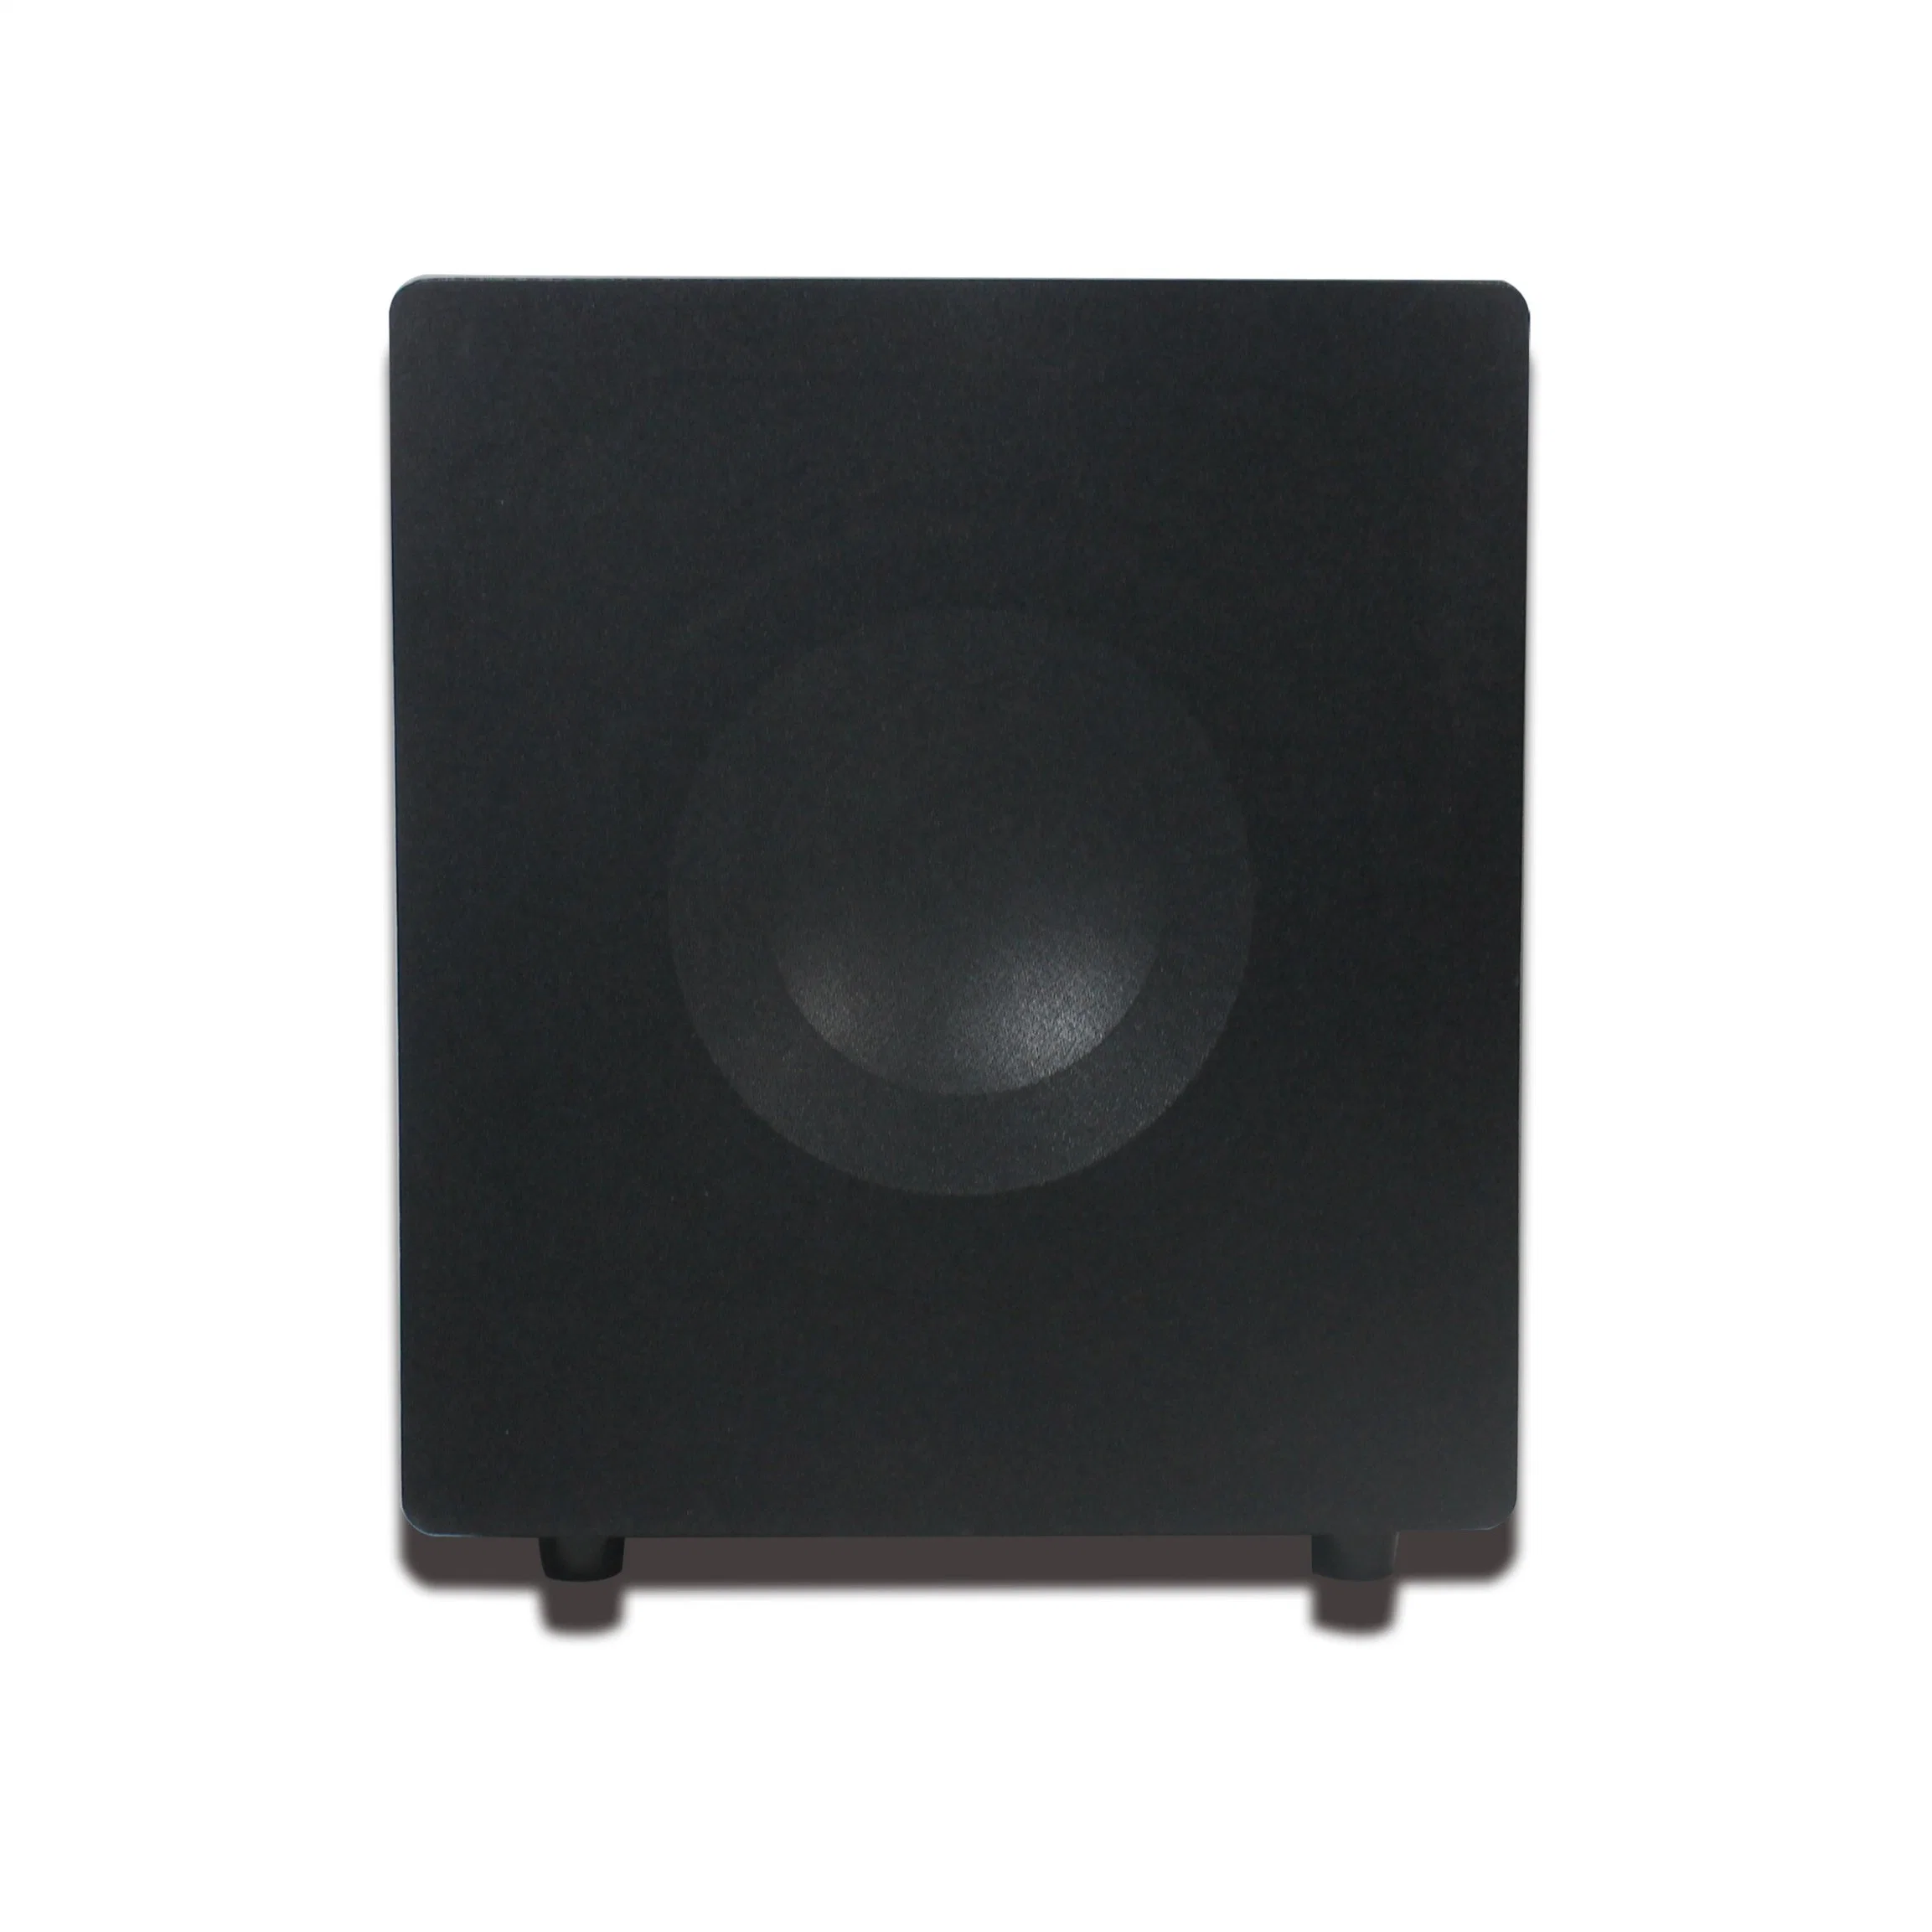 2.1 Channel Active Subwoofer Speaker with WiFi and Bluetooth